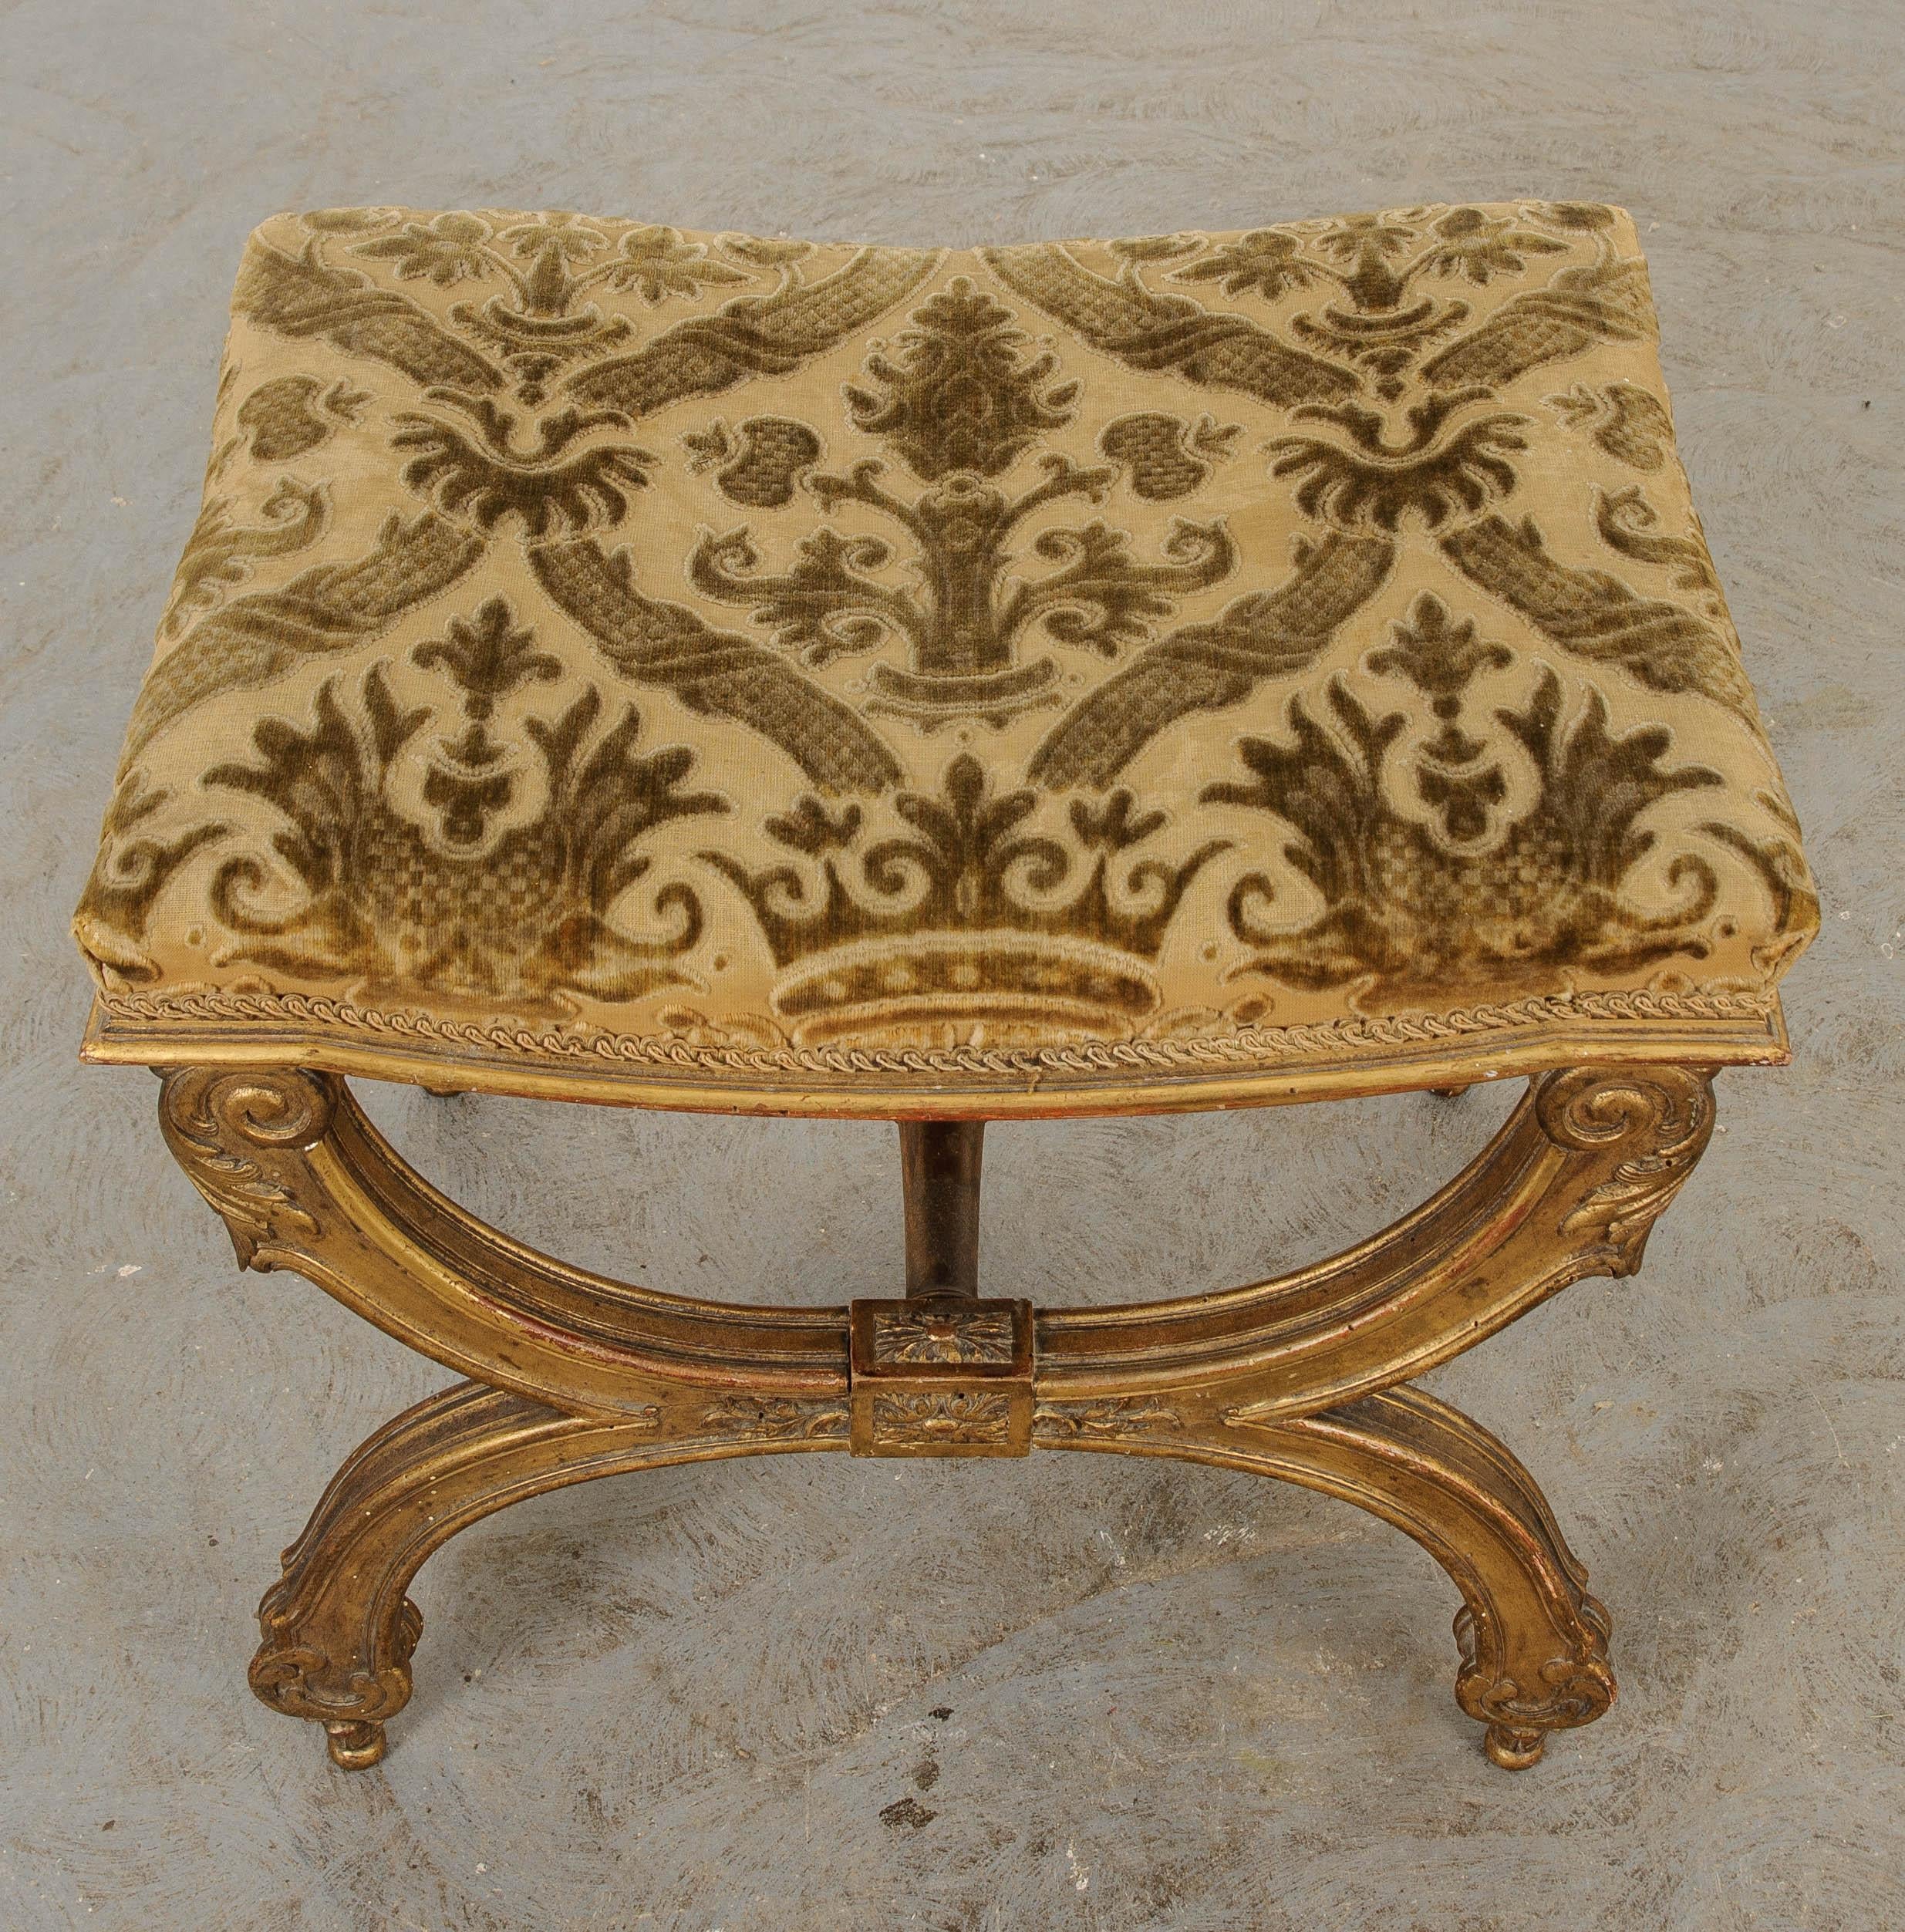 Carved French 19th Century Gilt Empire-Style Bench